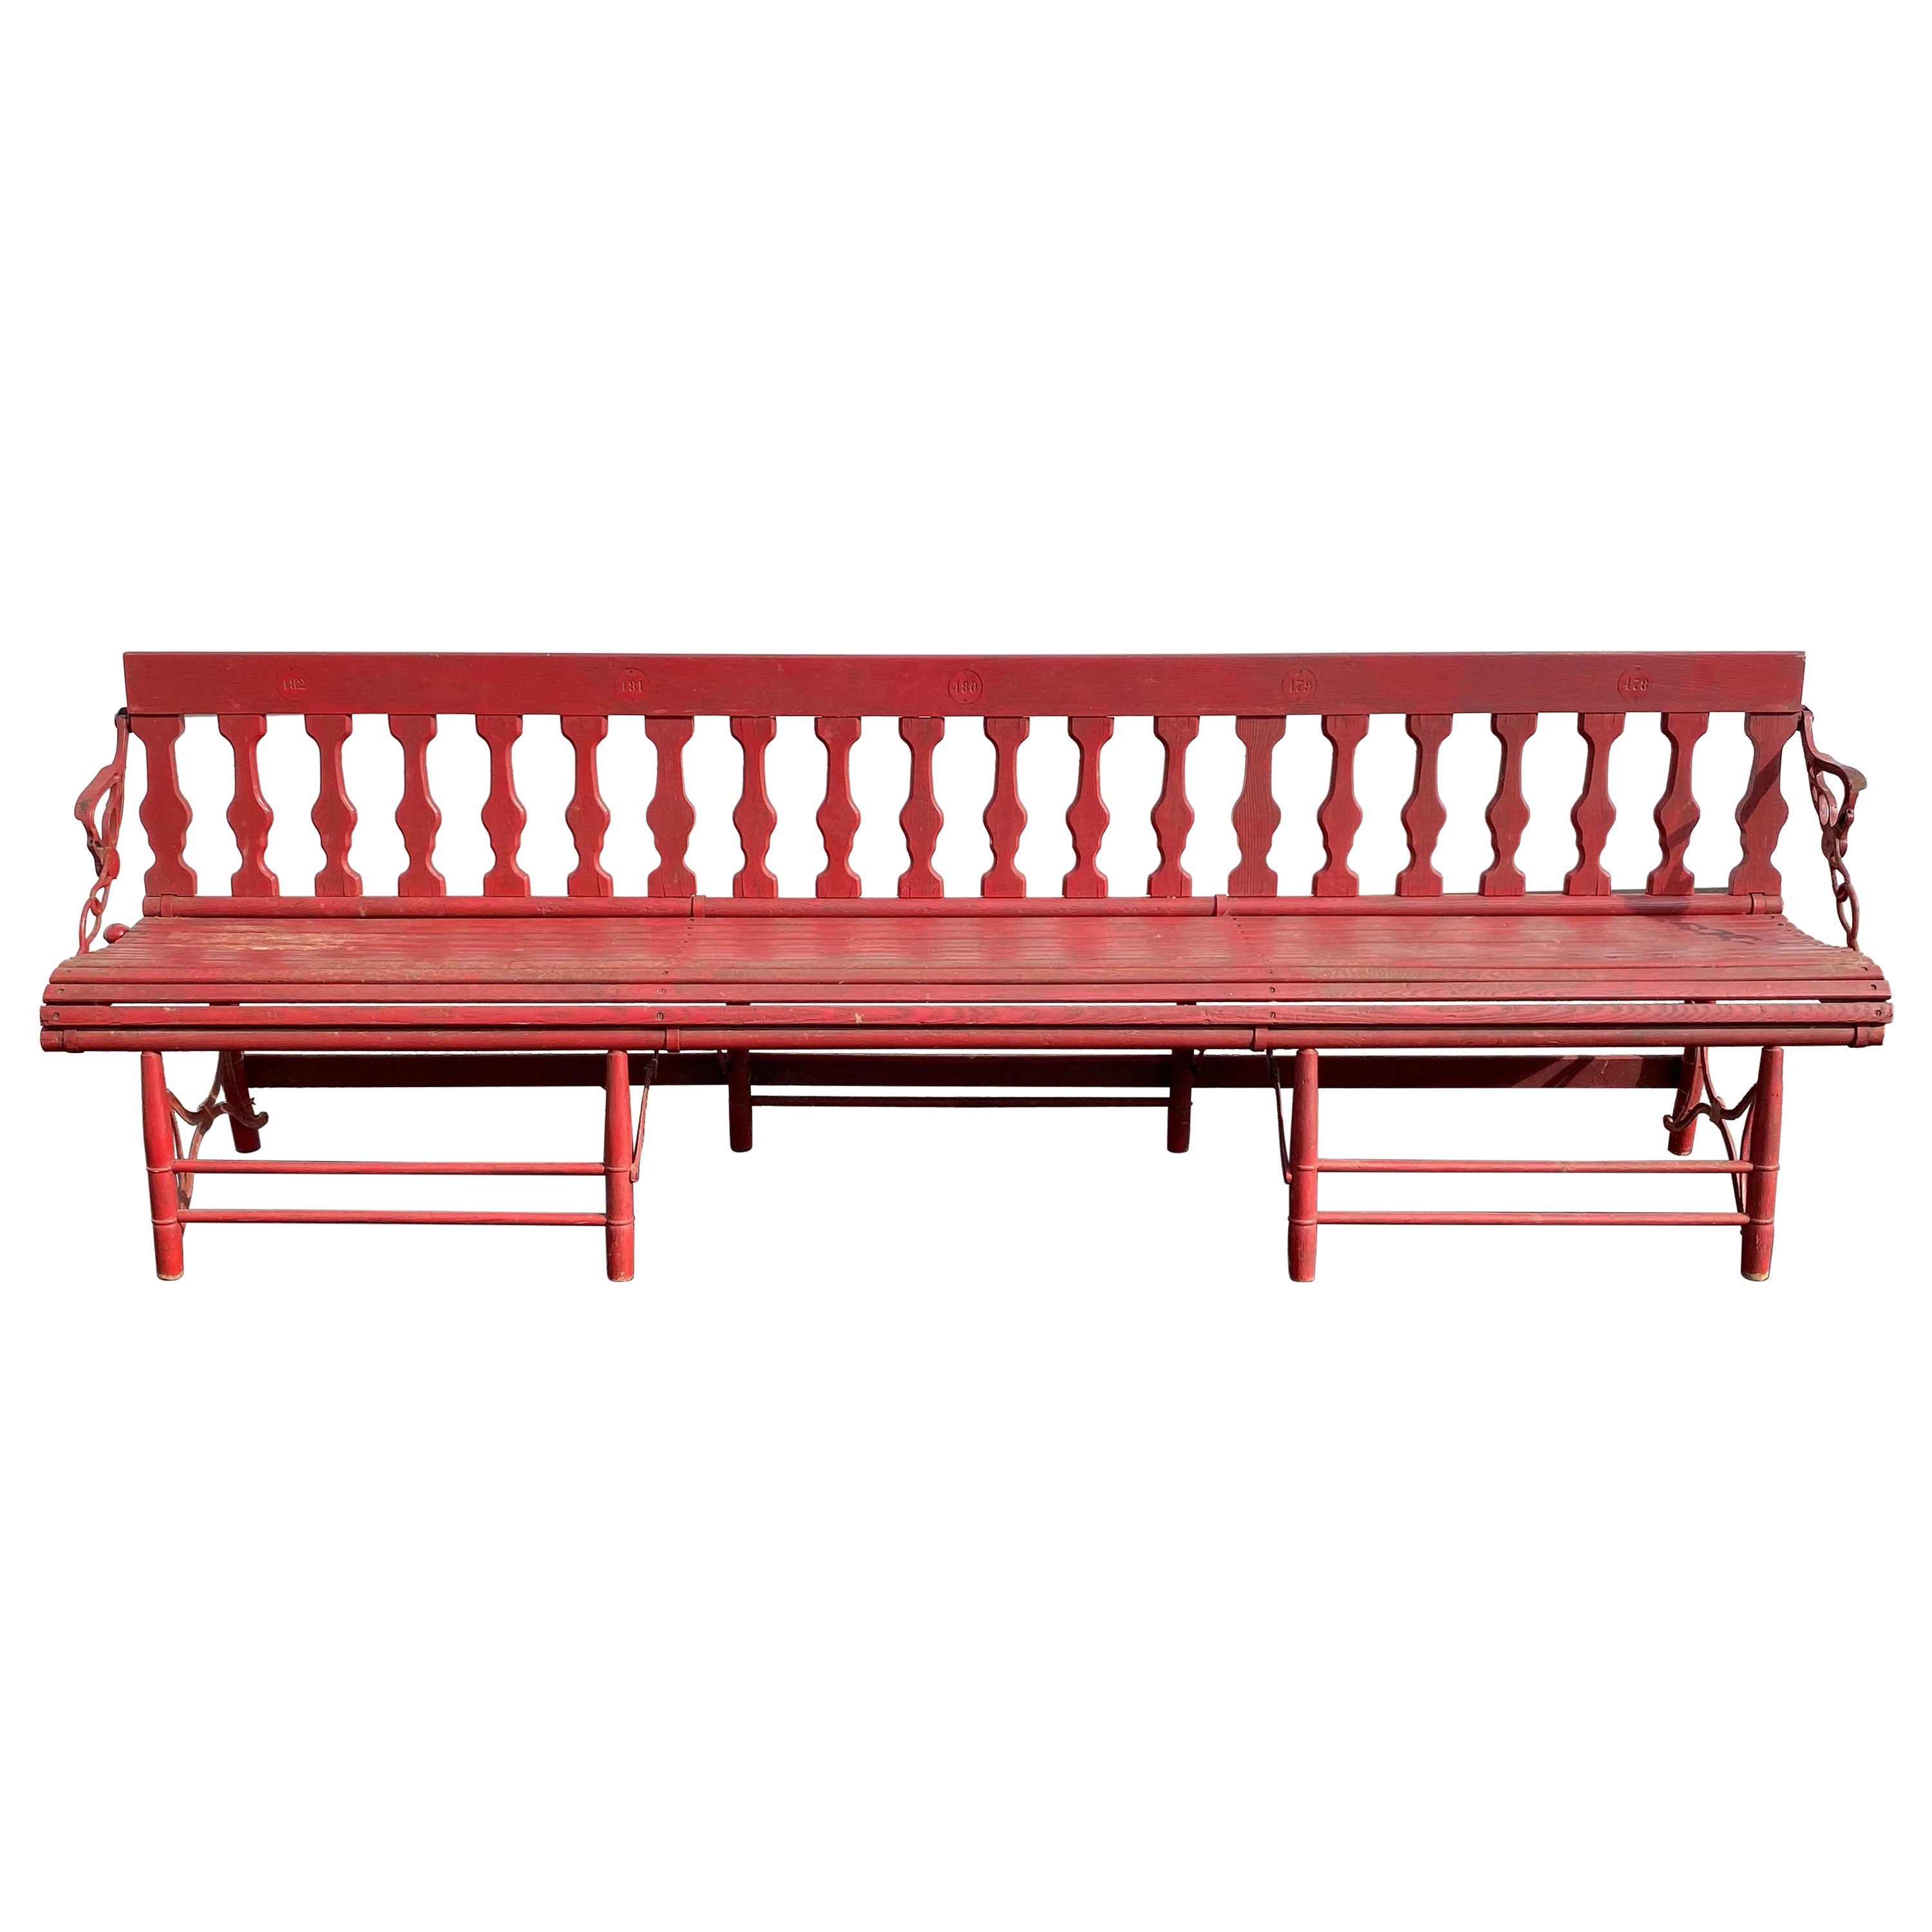 Late 19th Century Red Painted Oak & Cast Iron Folding Gymnasium or Station Bench